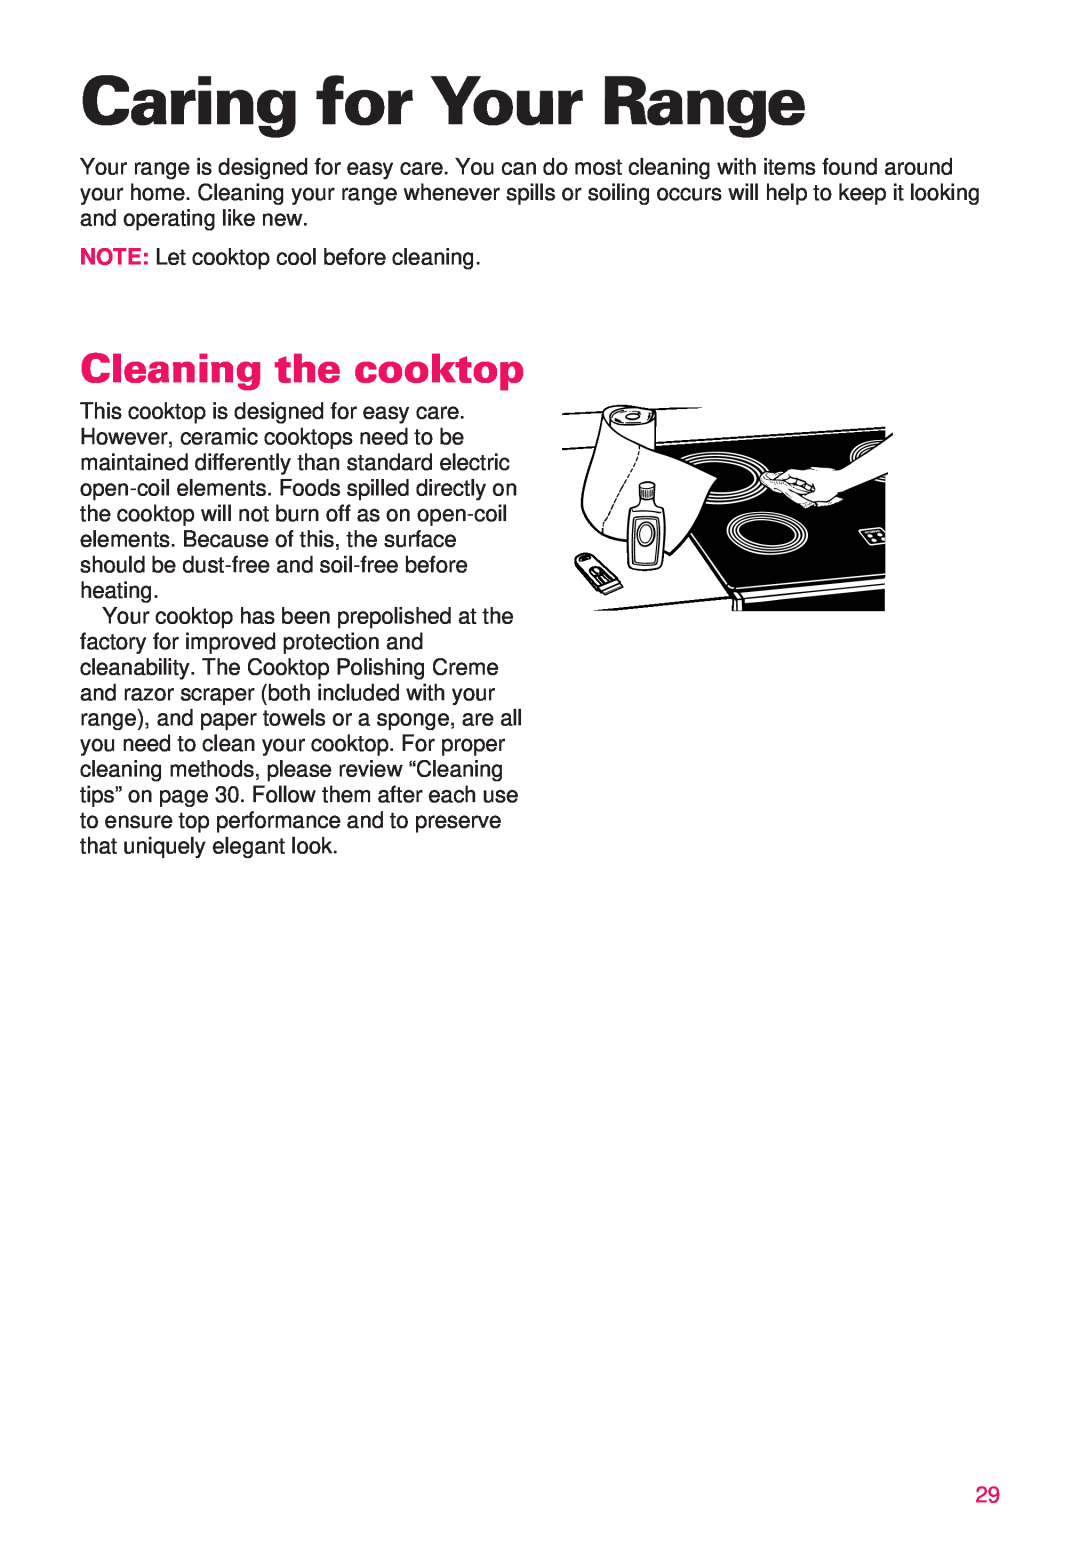 Whirlpool RS386PXE important safety instructions Caring for Your Range, Cleaning the cooktop 